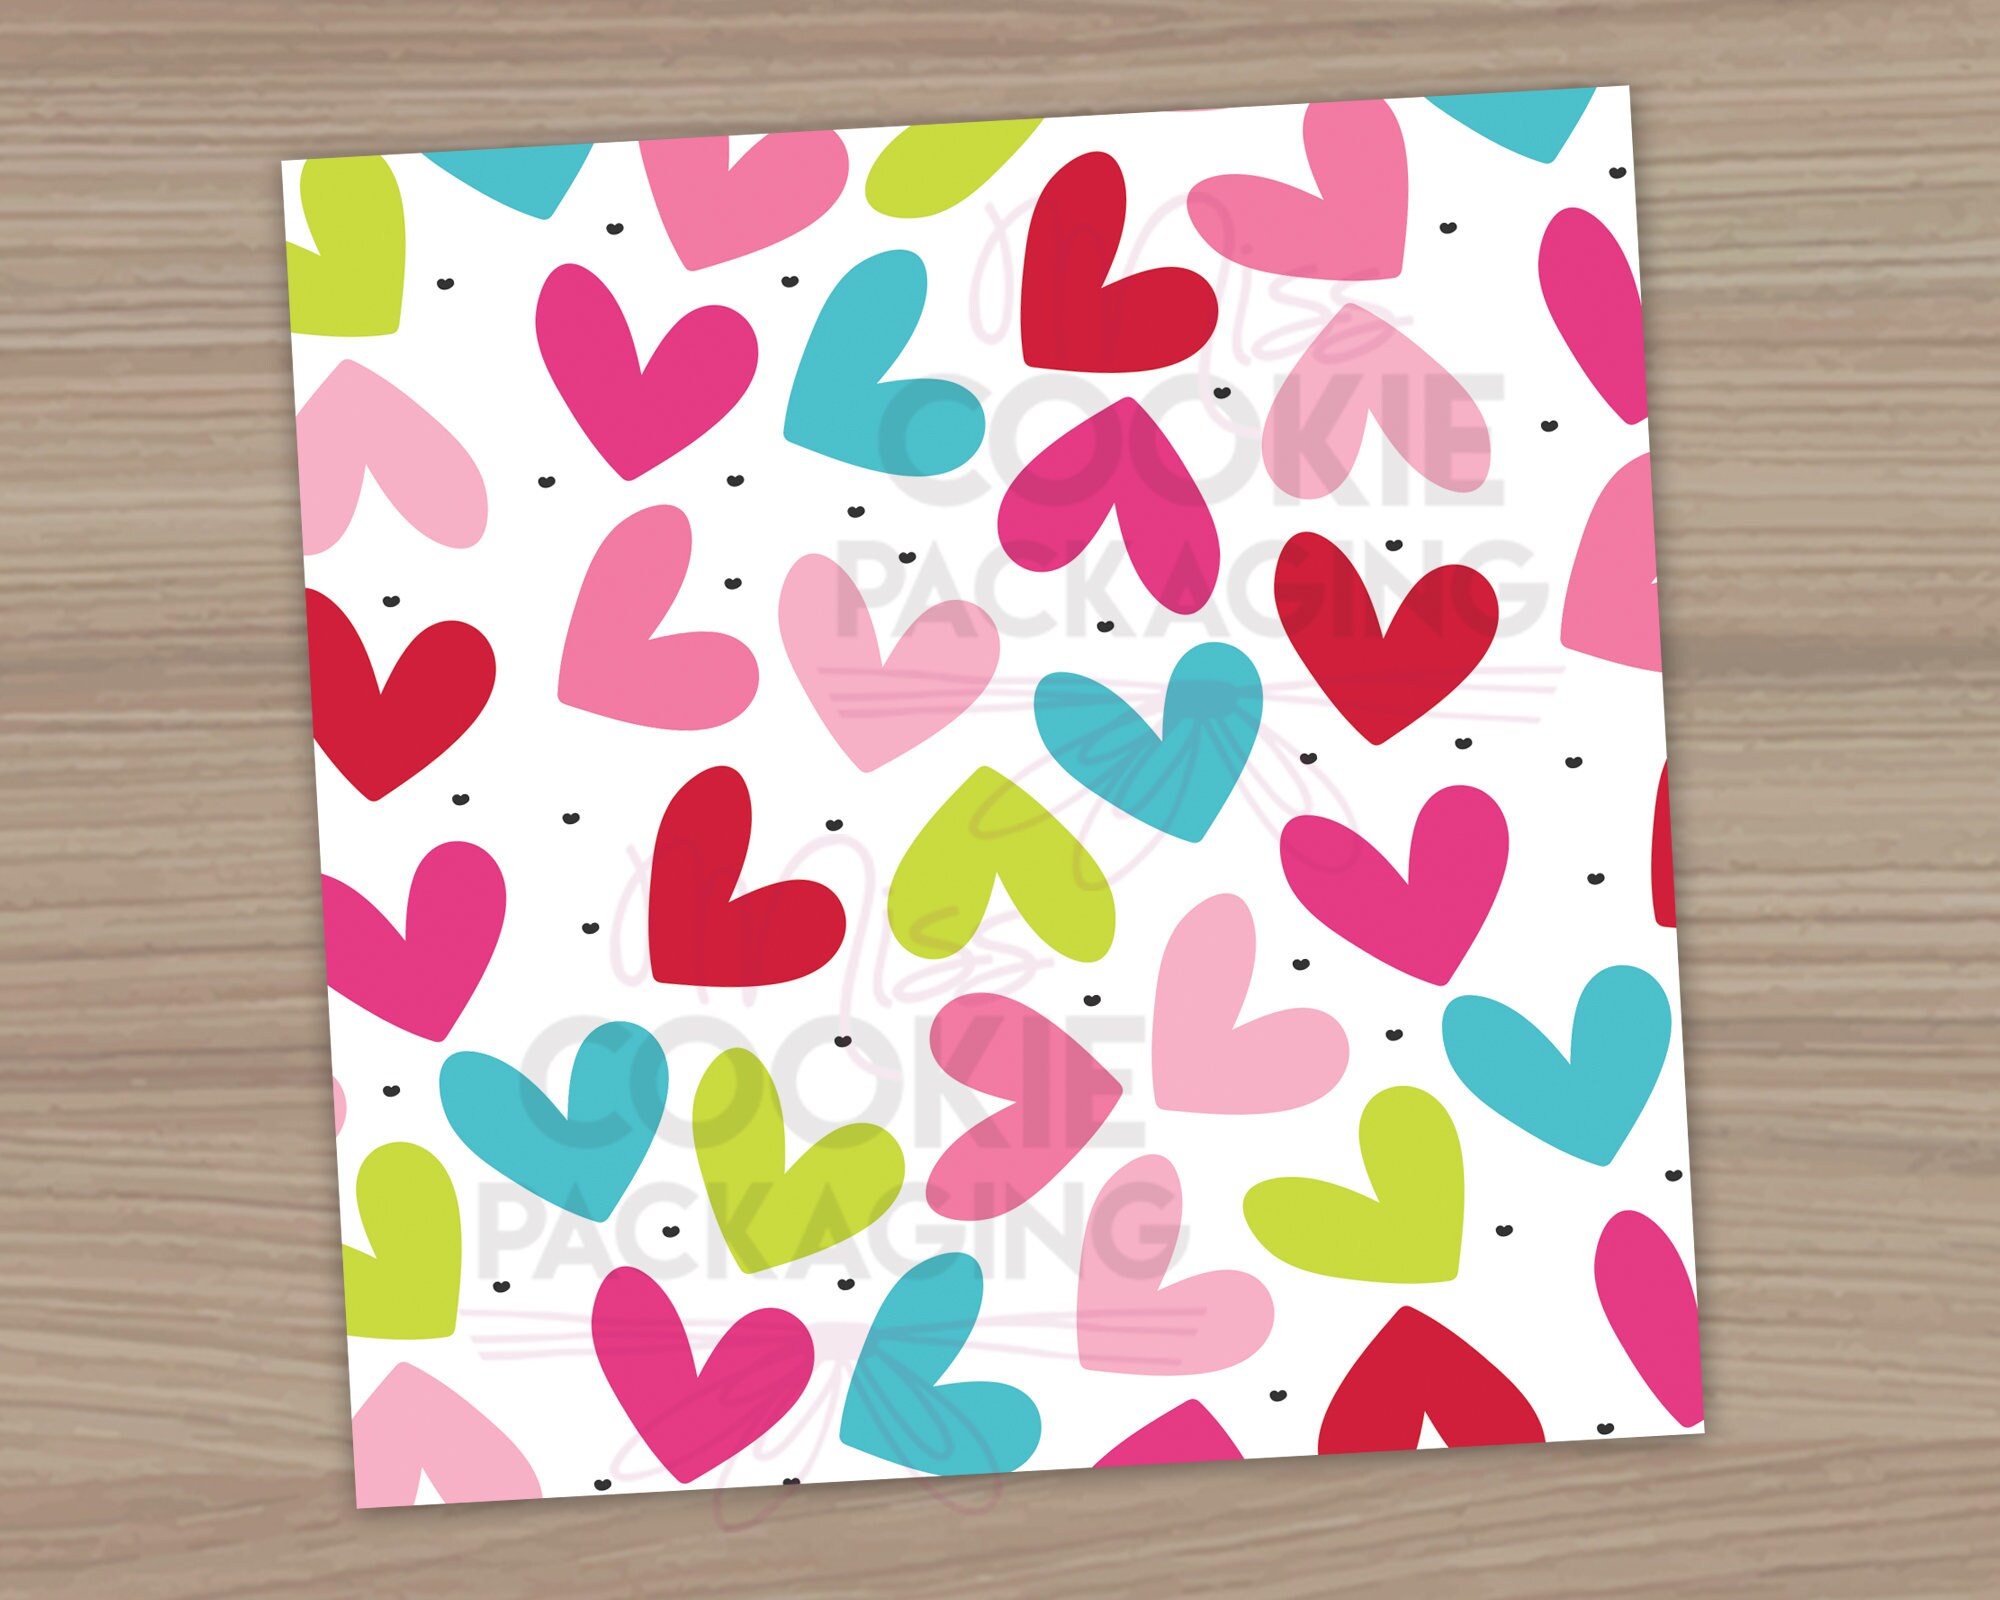 24 PC 4x5 Sticker by Number Valentine's Day Cards